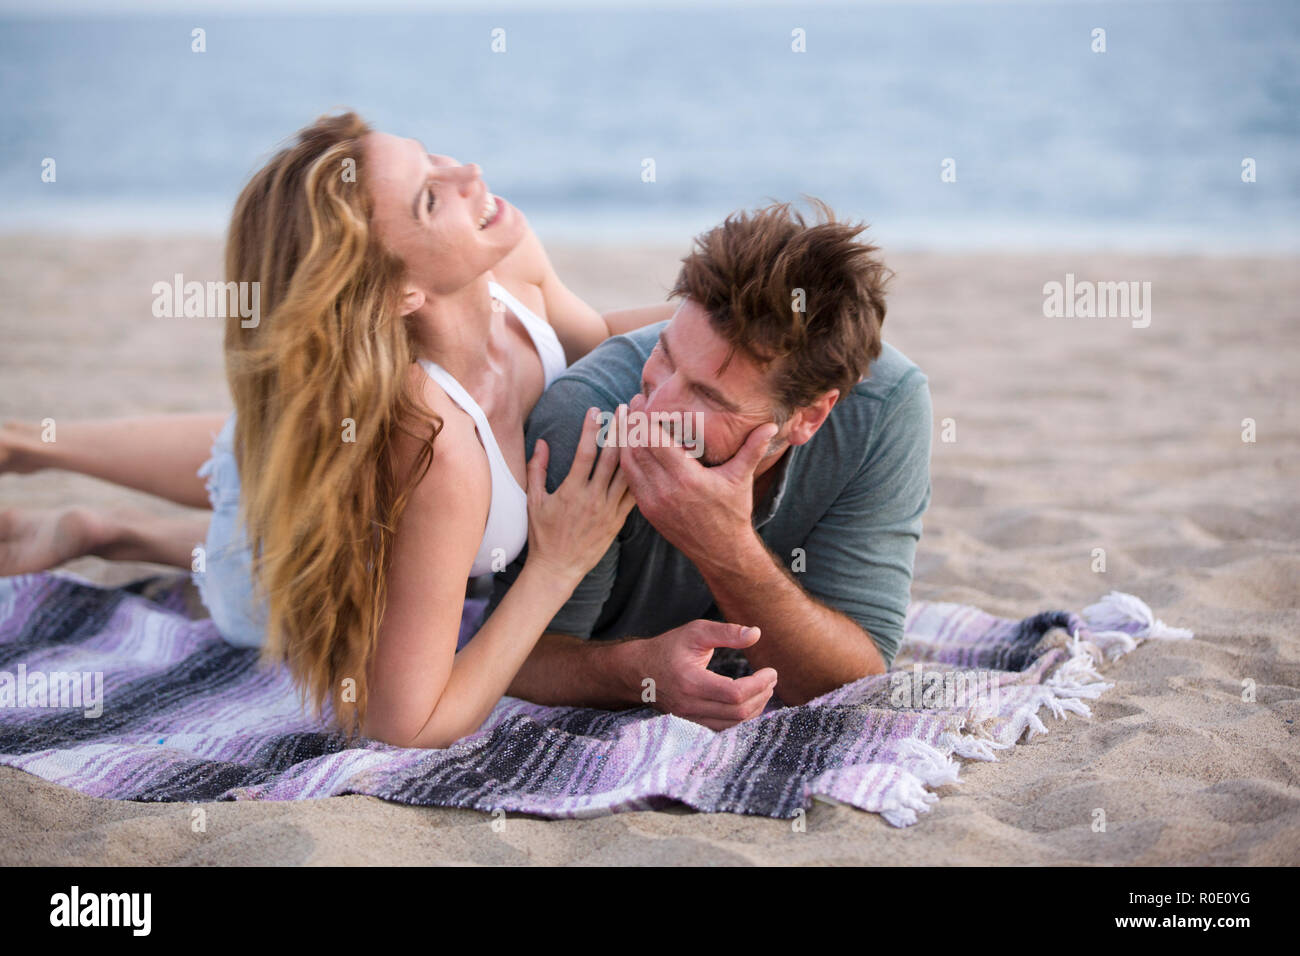 Laughing Mid-Adult Couple Laying on Blanket at Beach Stock Photo